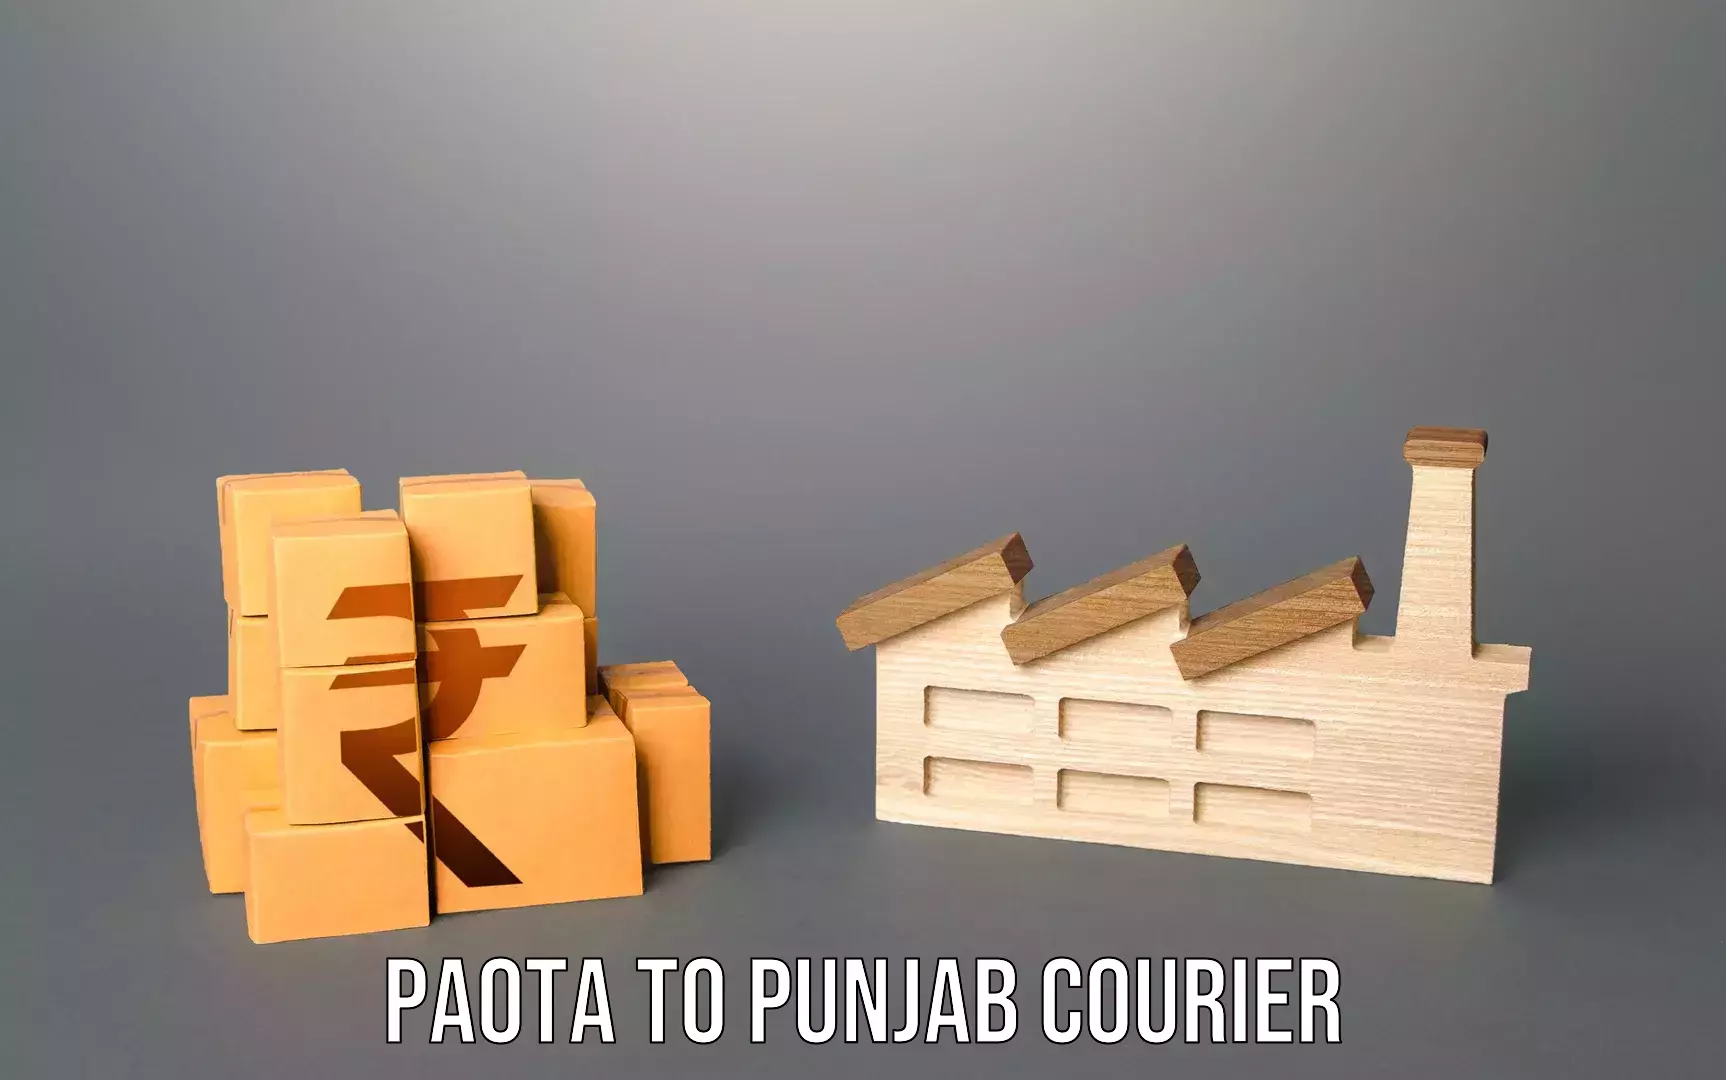 Instant baggage transport quote Paota to Punjab